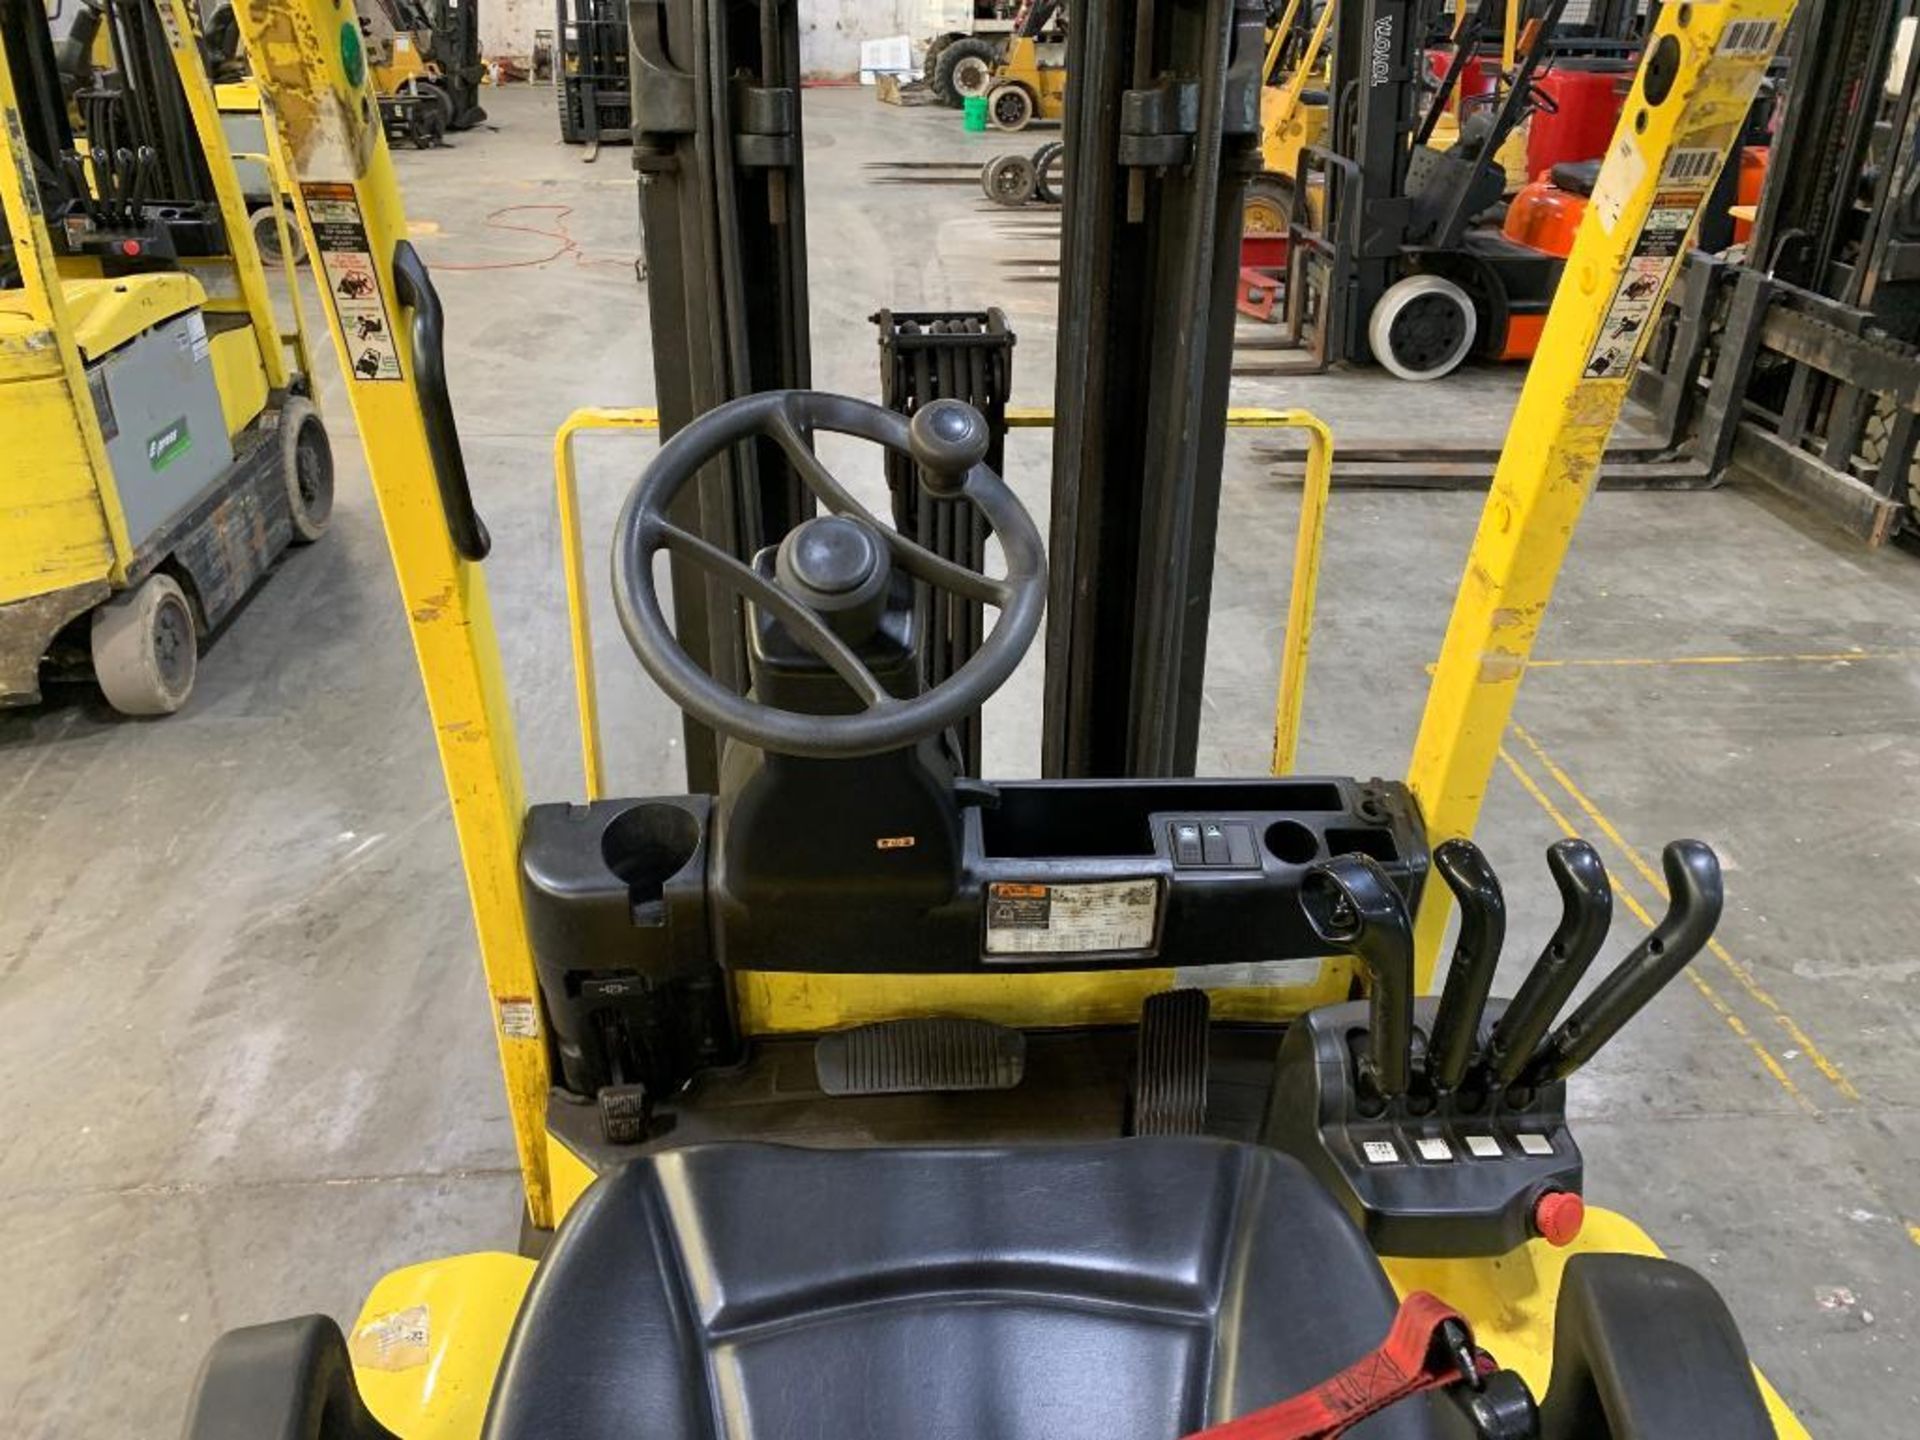 2017 Hyster 5,000 lb. capacity forklift, model e50xn, s/n a268n21839r, 36-volt electric w/ battery, - Image 5 of 5